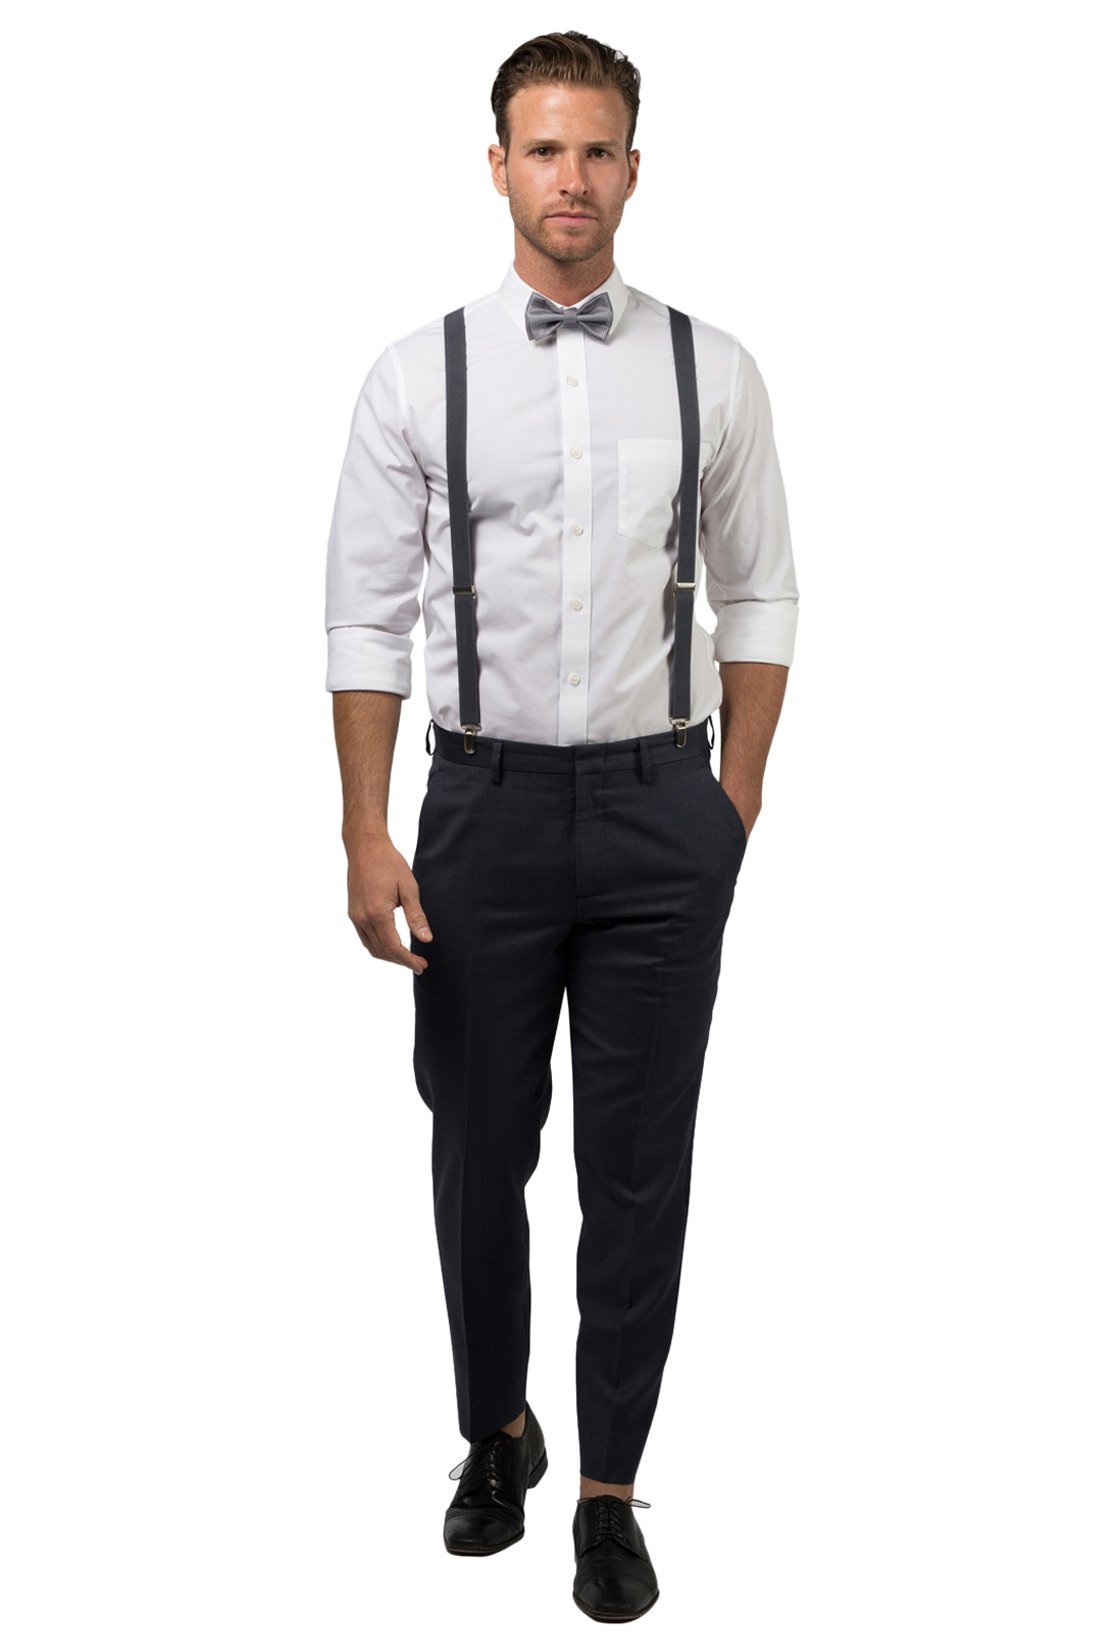 Charcoal Suspenders & Silver Polka Dot Bow Tie